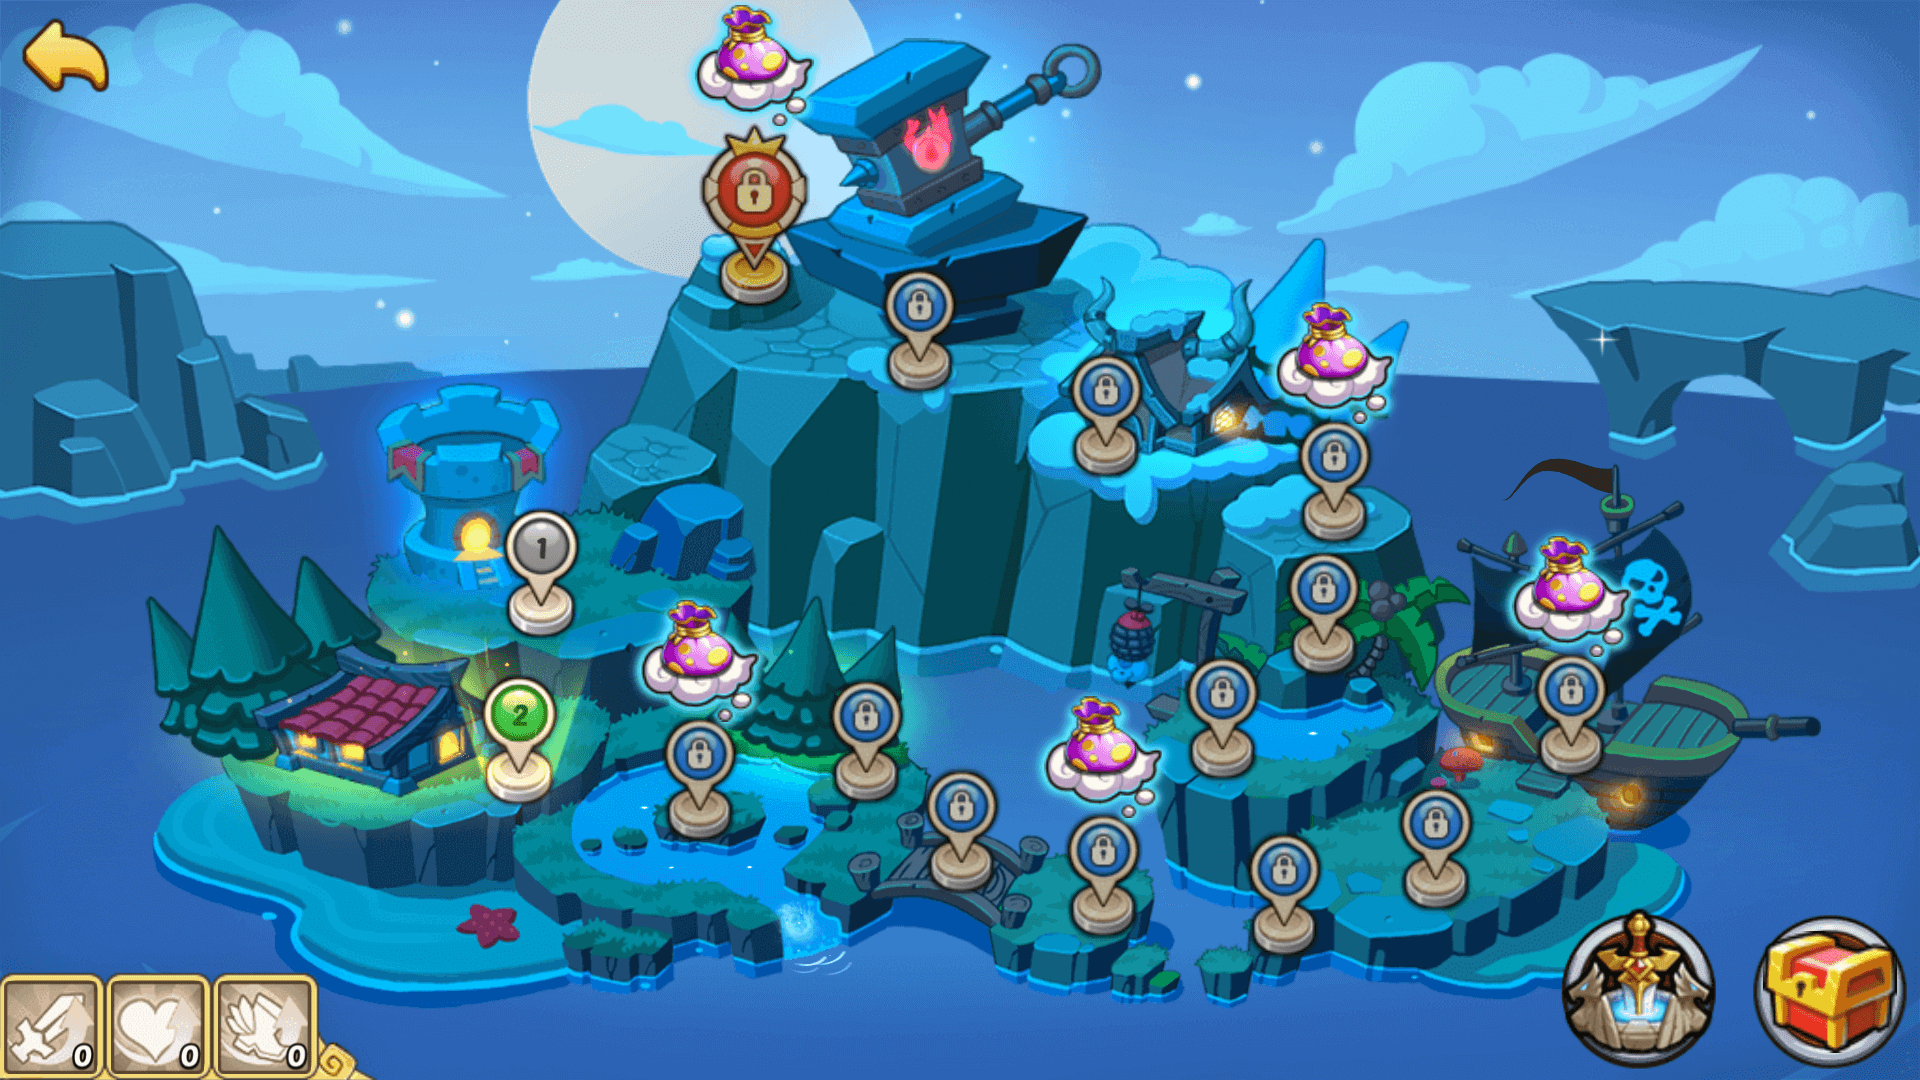 What Are The Important Tips For Playing This Tactical Game Idle Heroes?